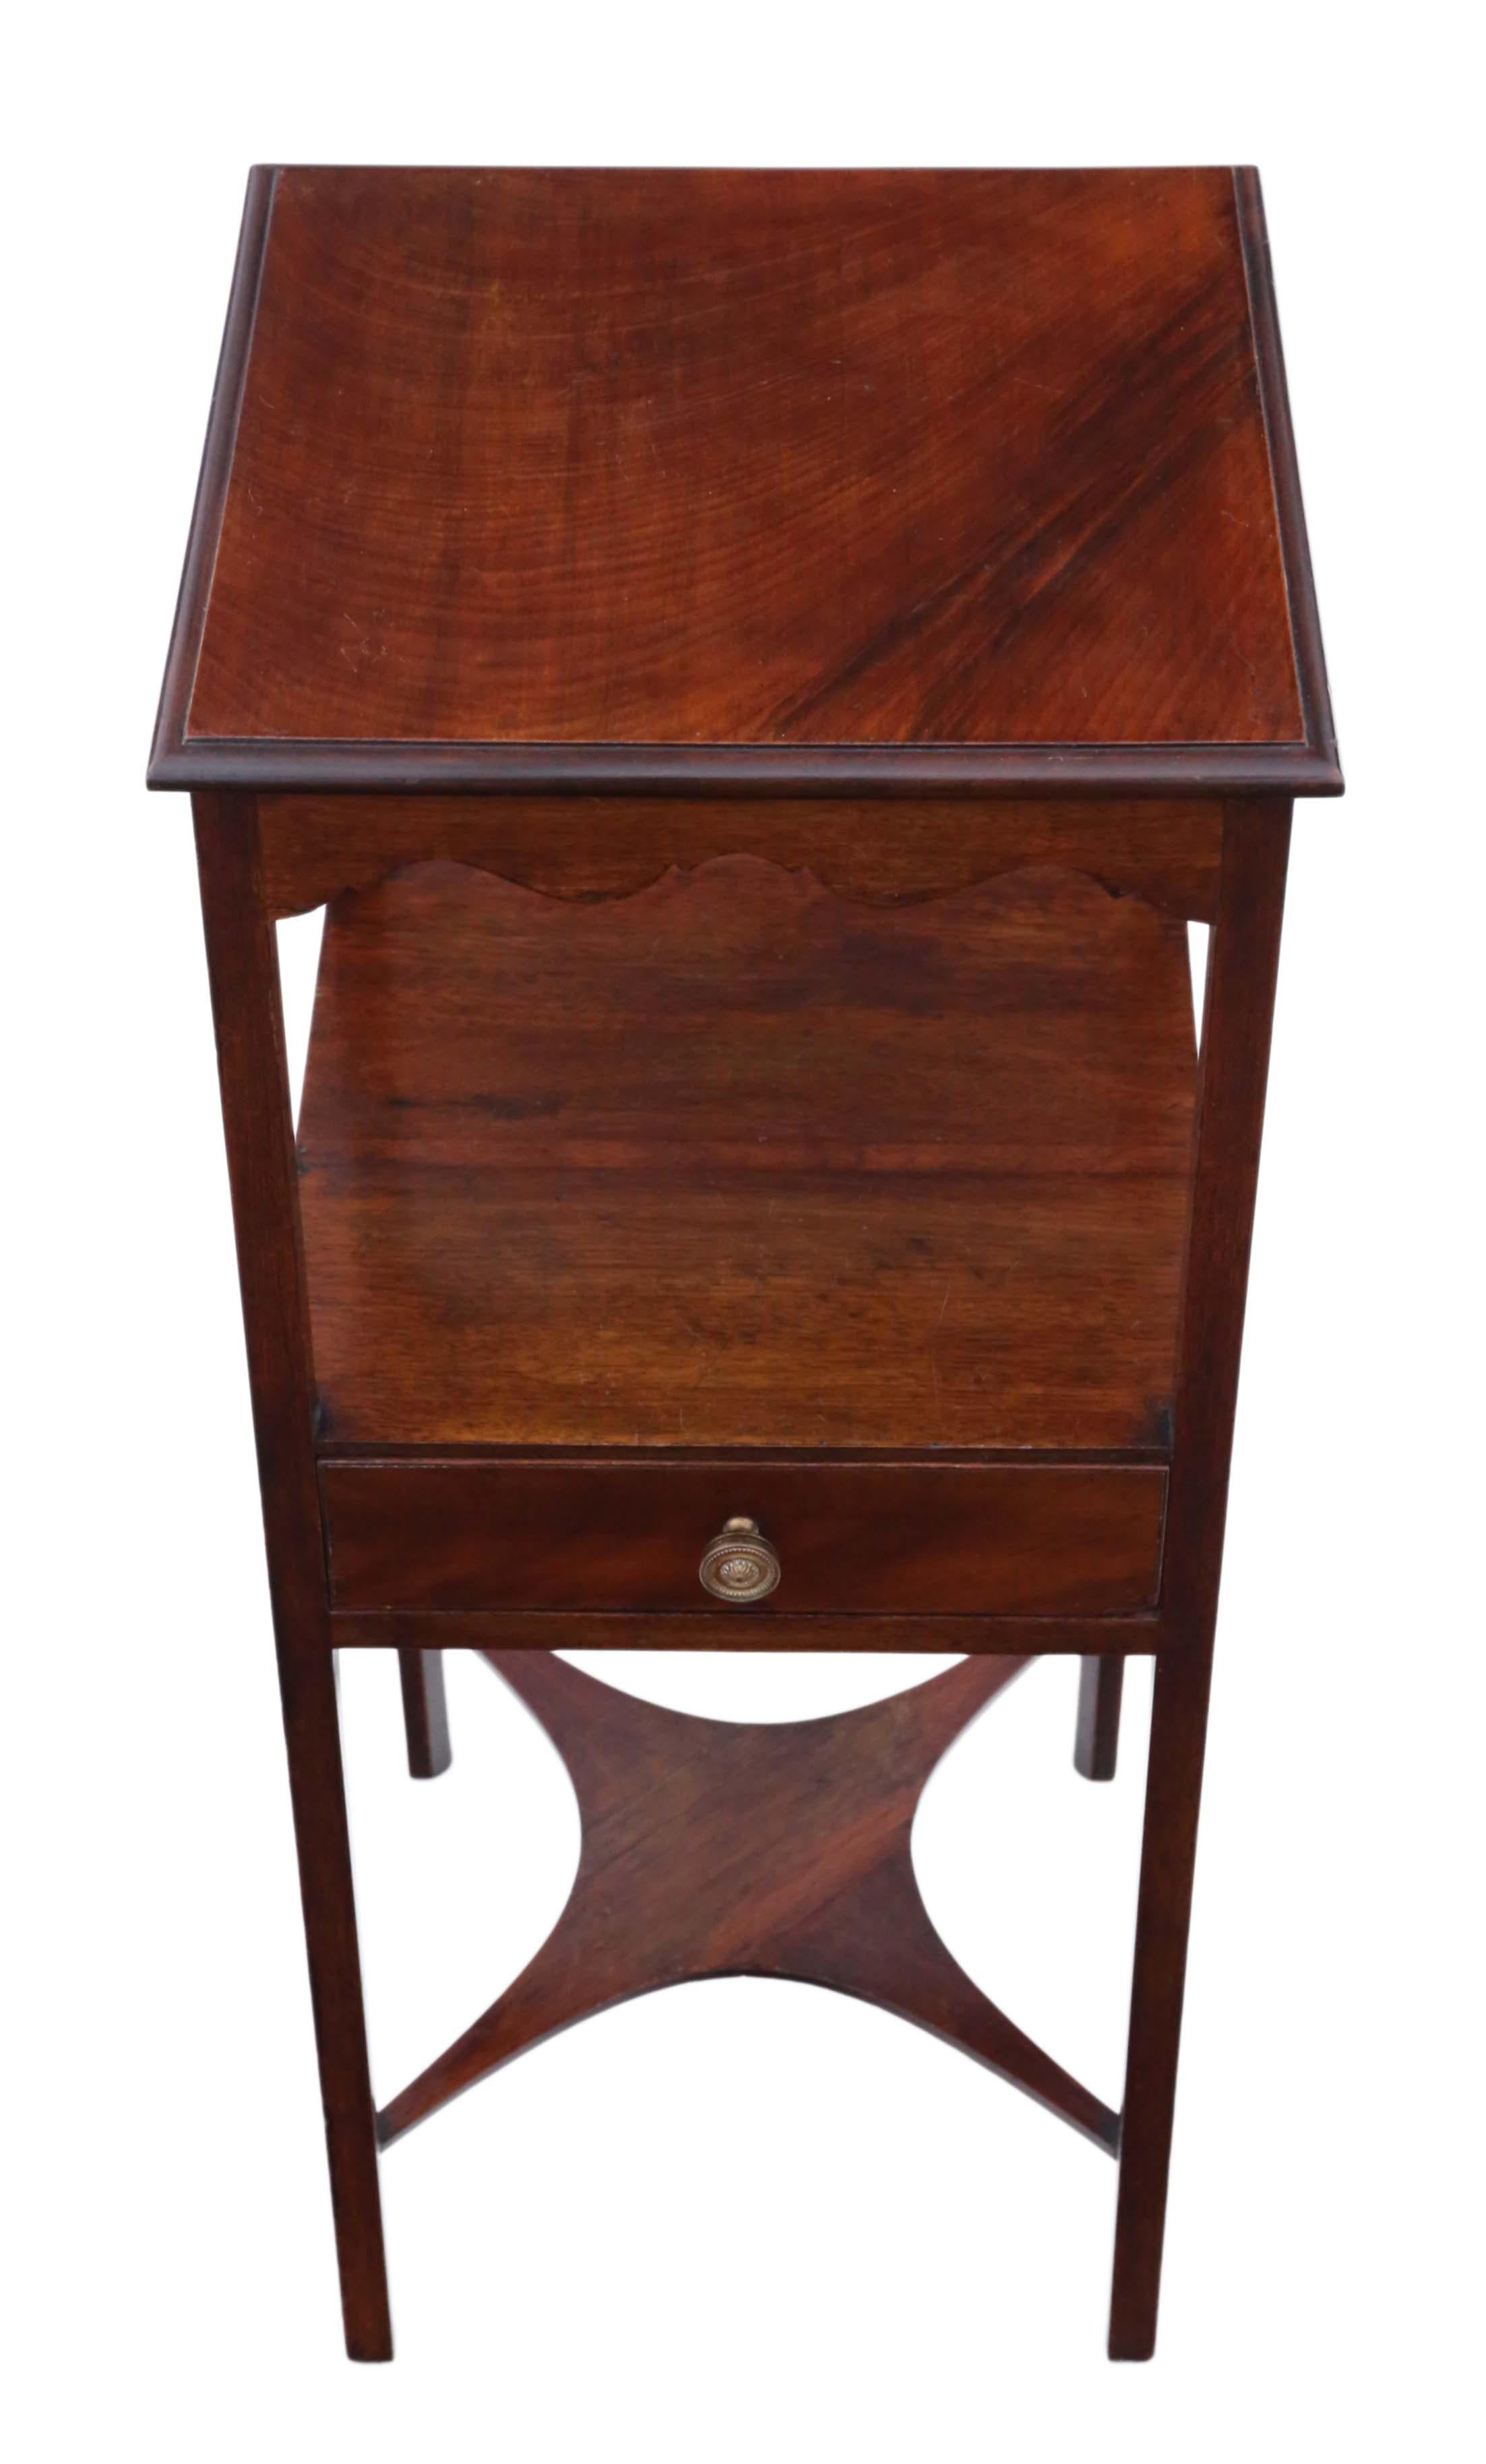 Antique quality Georgian mahogany washstand, nightstand or bedside table C1820.

Great rare item, which is solid with no loose joints. The drawer slides freely.

Lovely age, colour and patina.

36cm wide x 36cm deep x 82cm high, 23cmH space